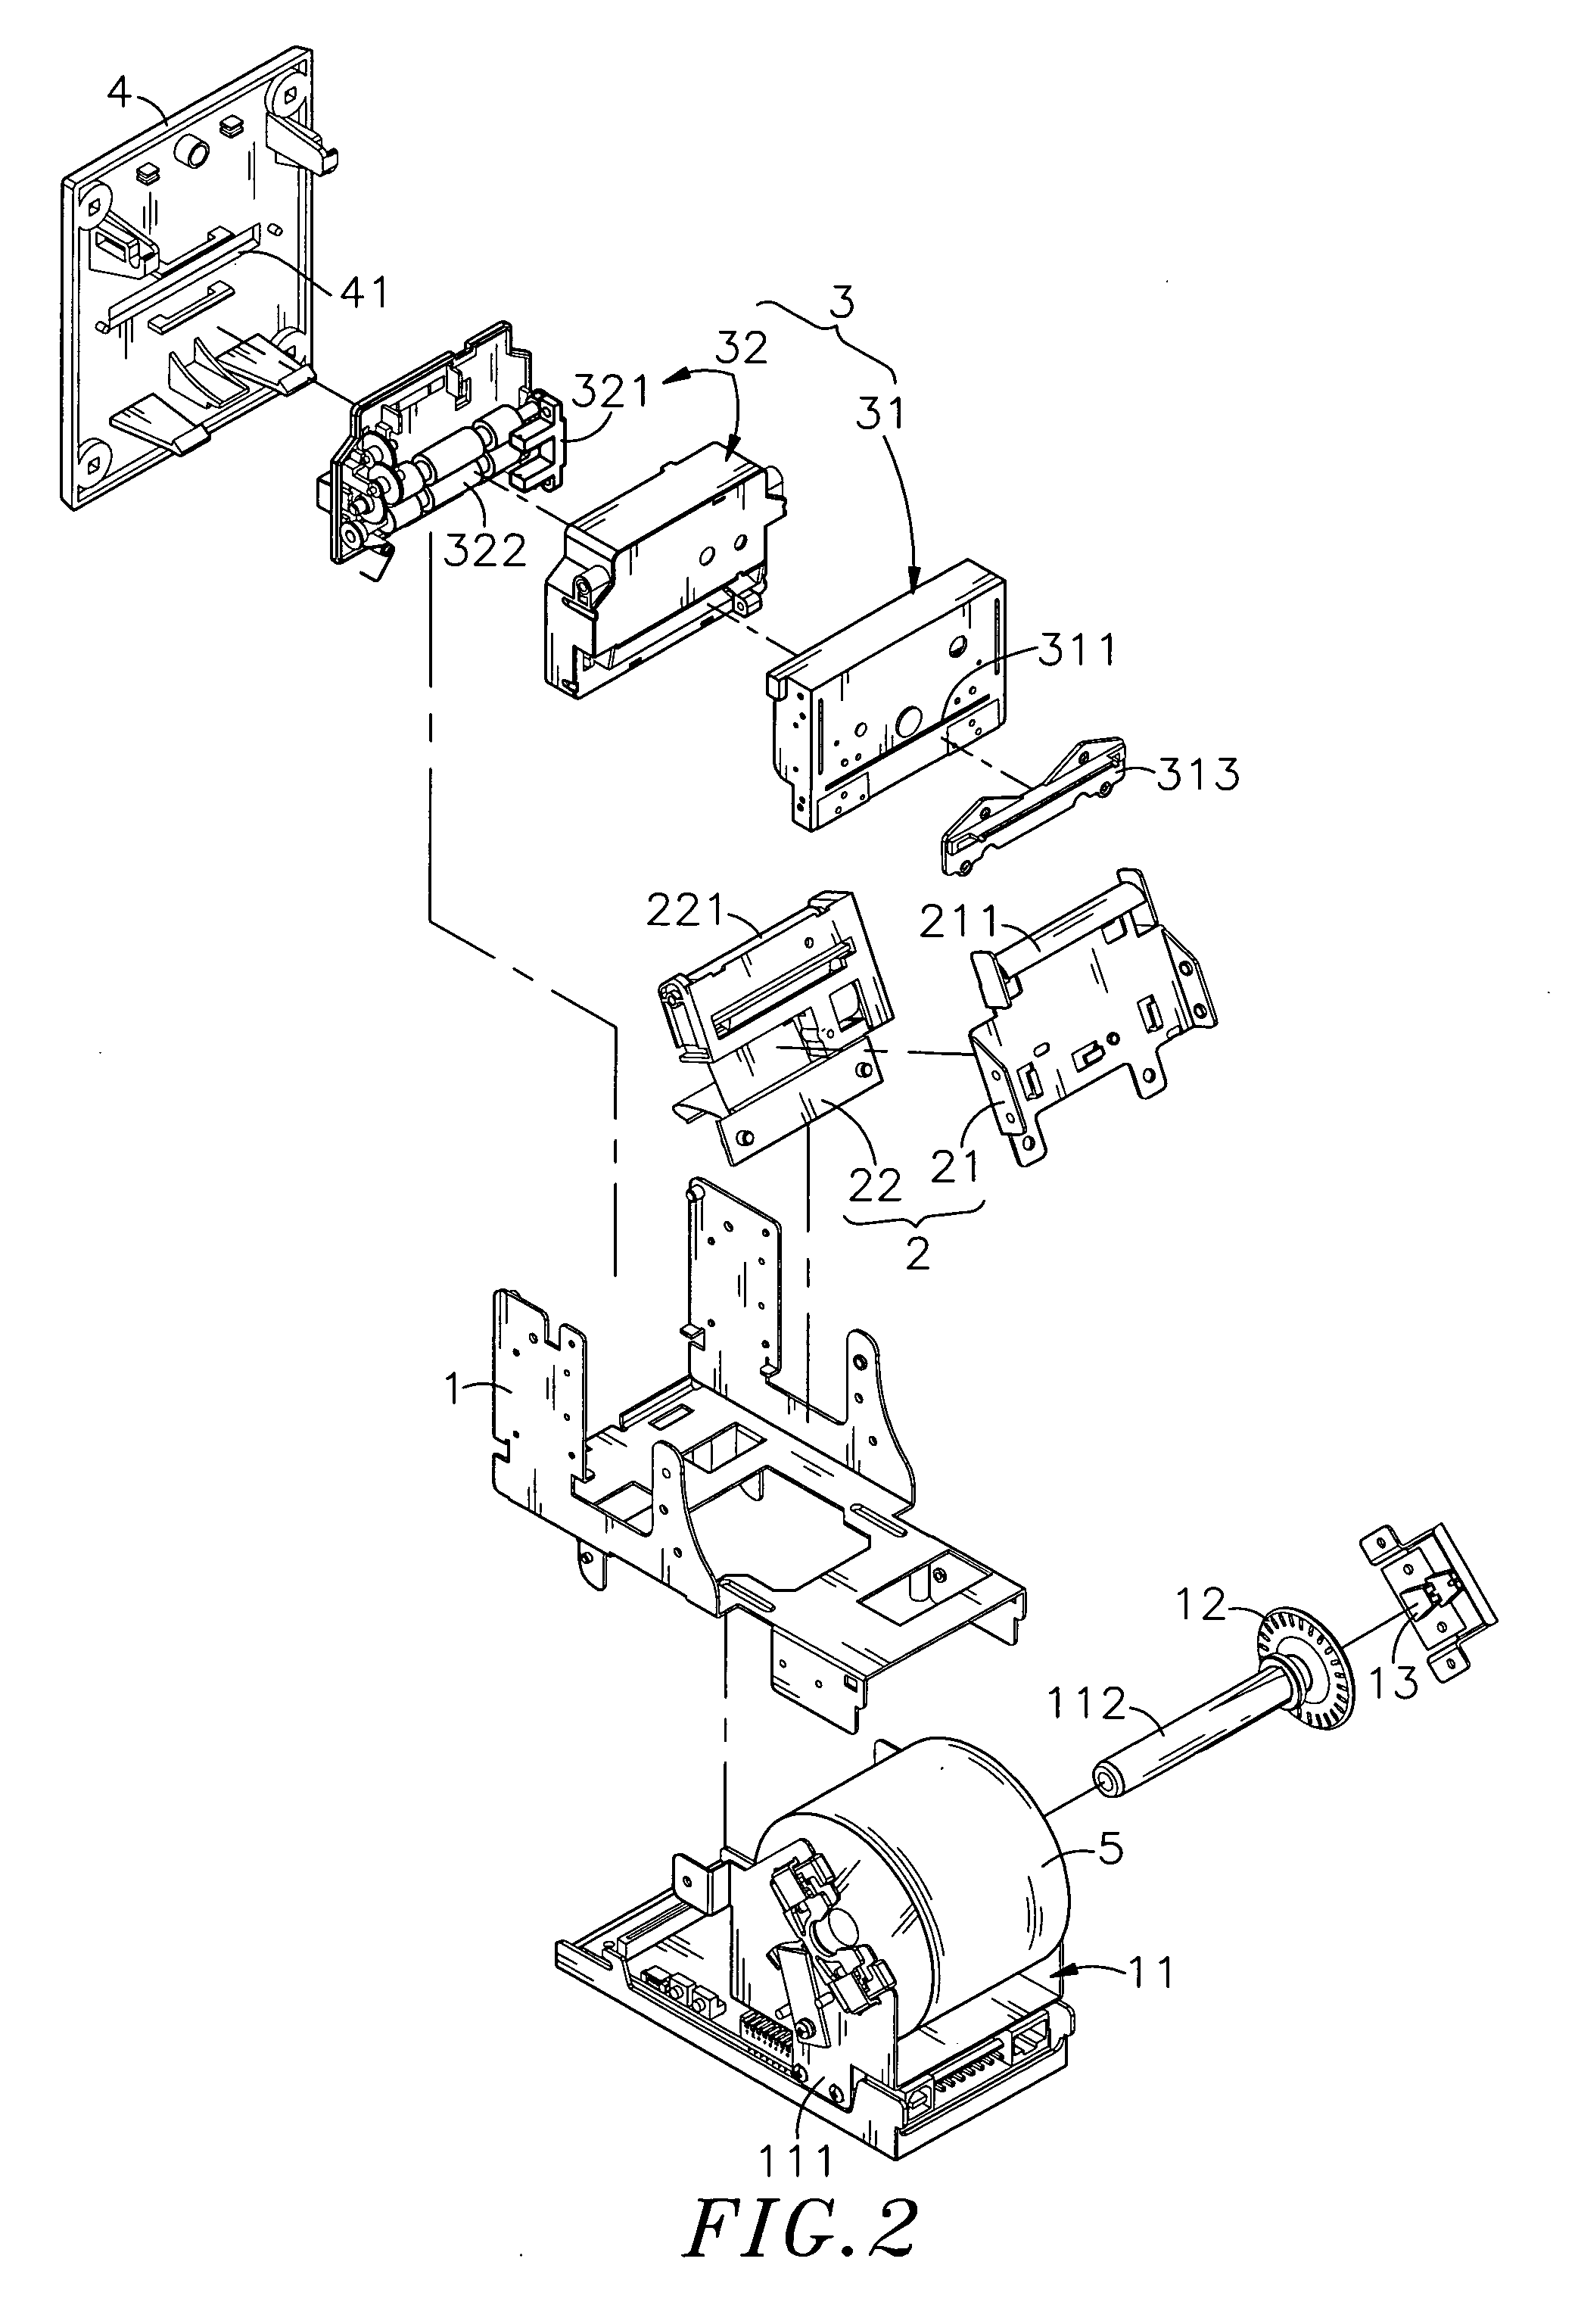 Printer module paper feed-out procedure